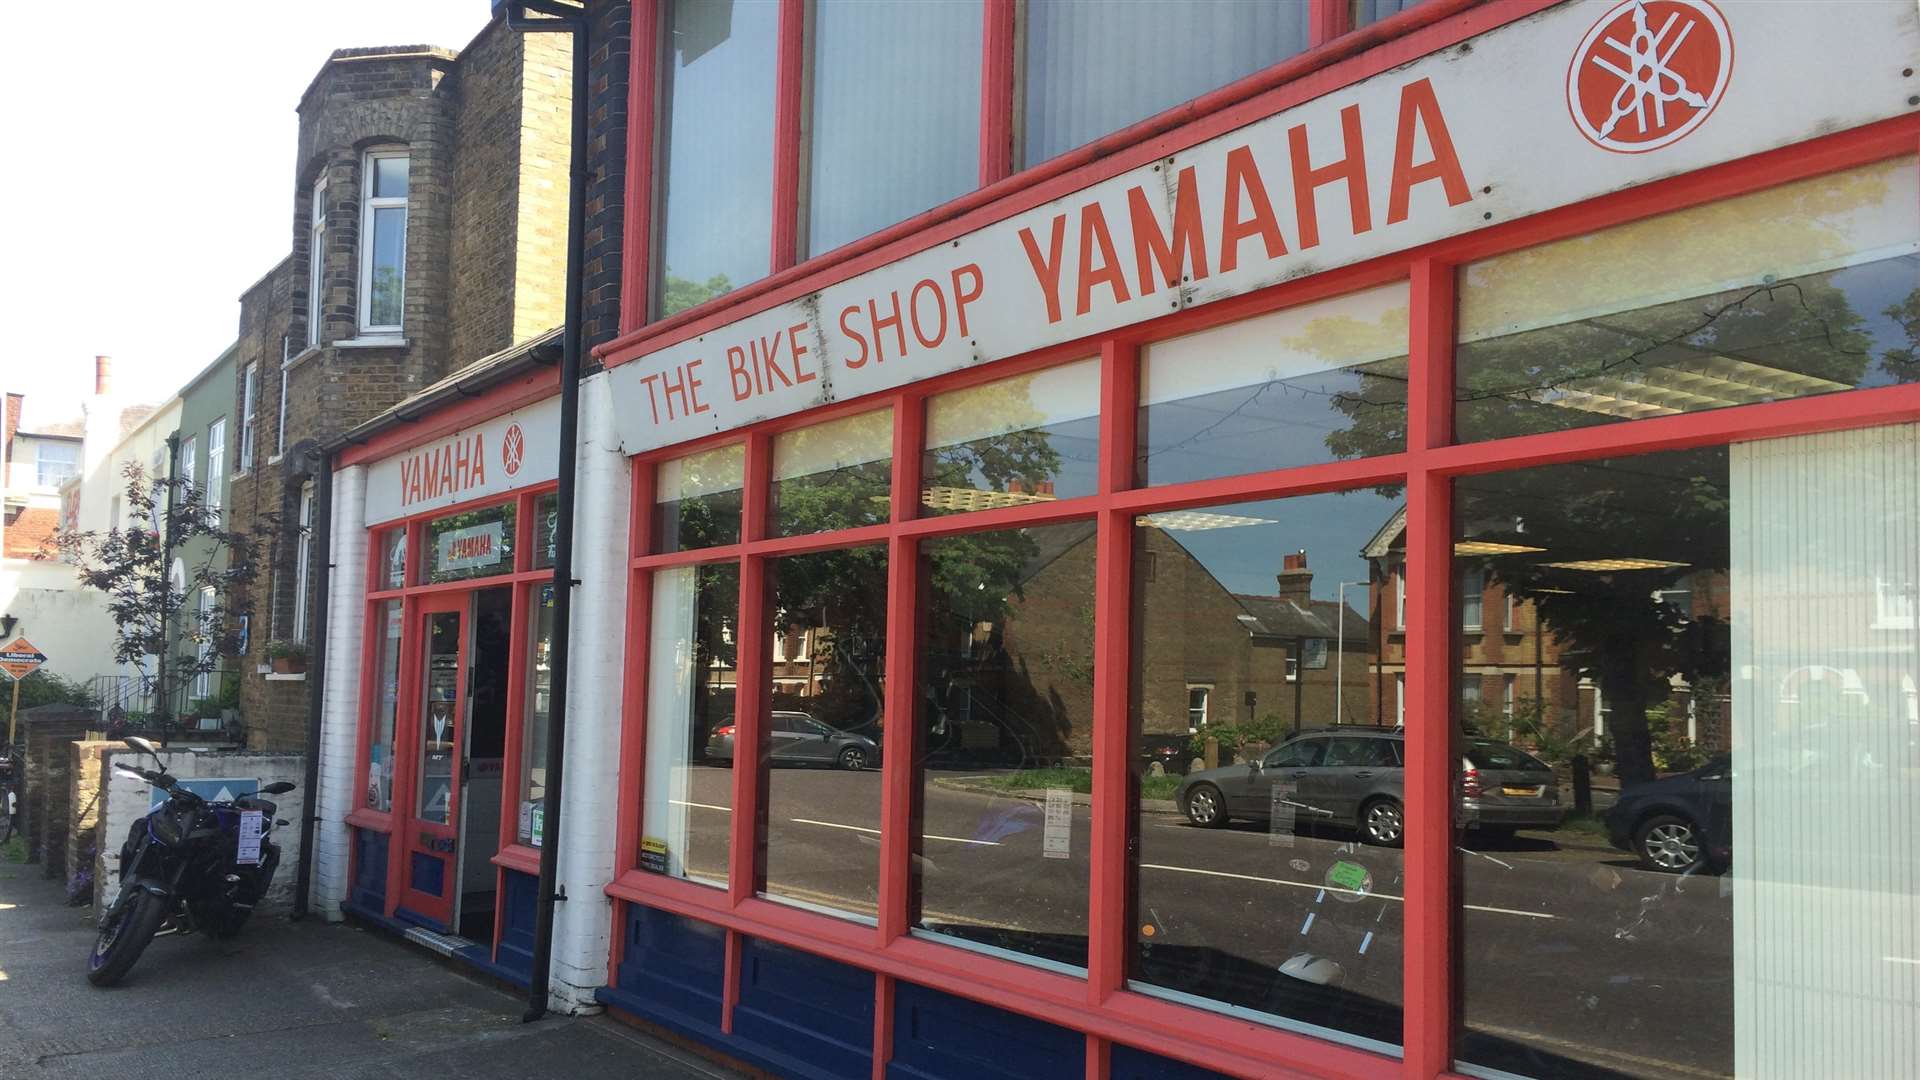 The Yamaha bike shop in The Mall, Faversham, is closing after 40 years of business.